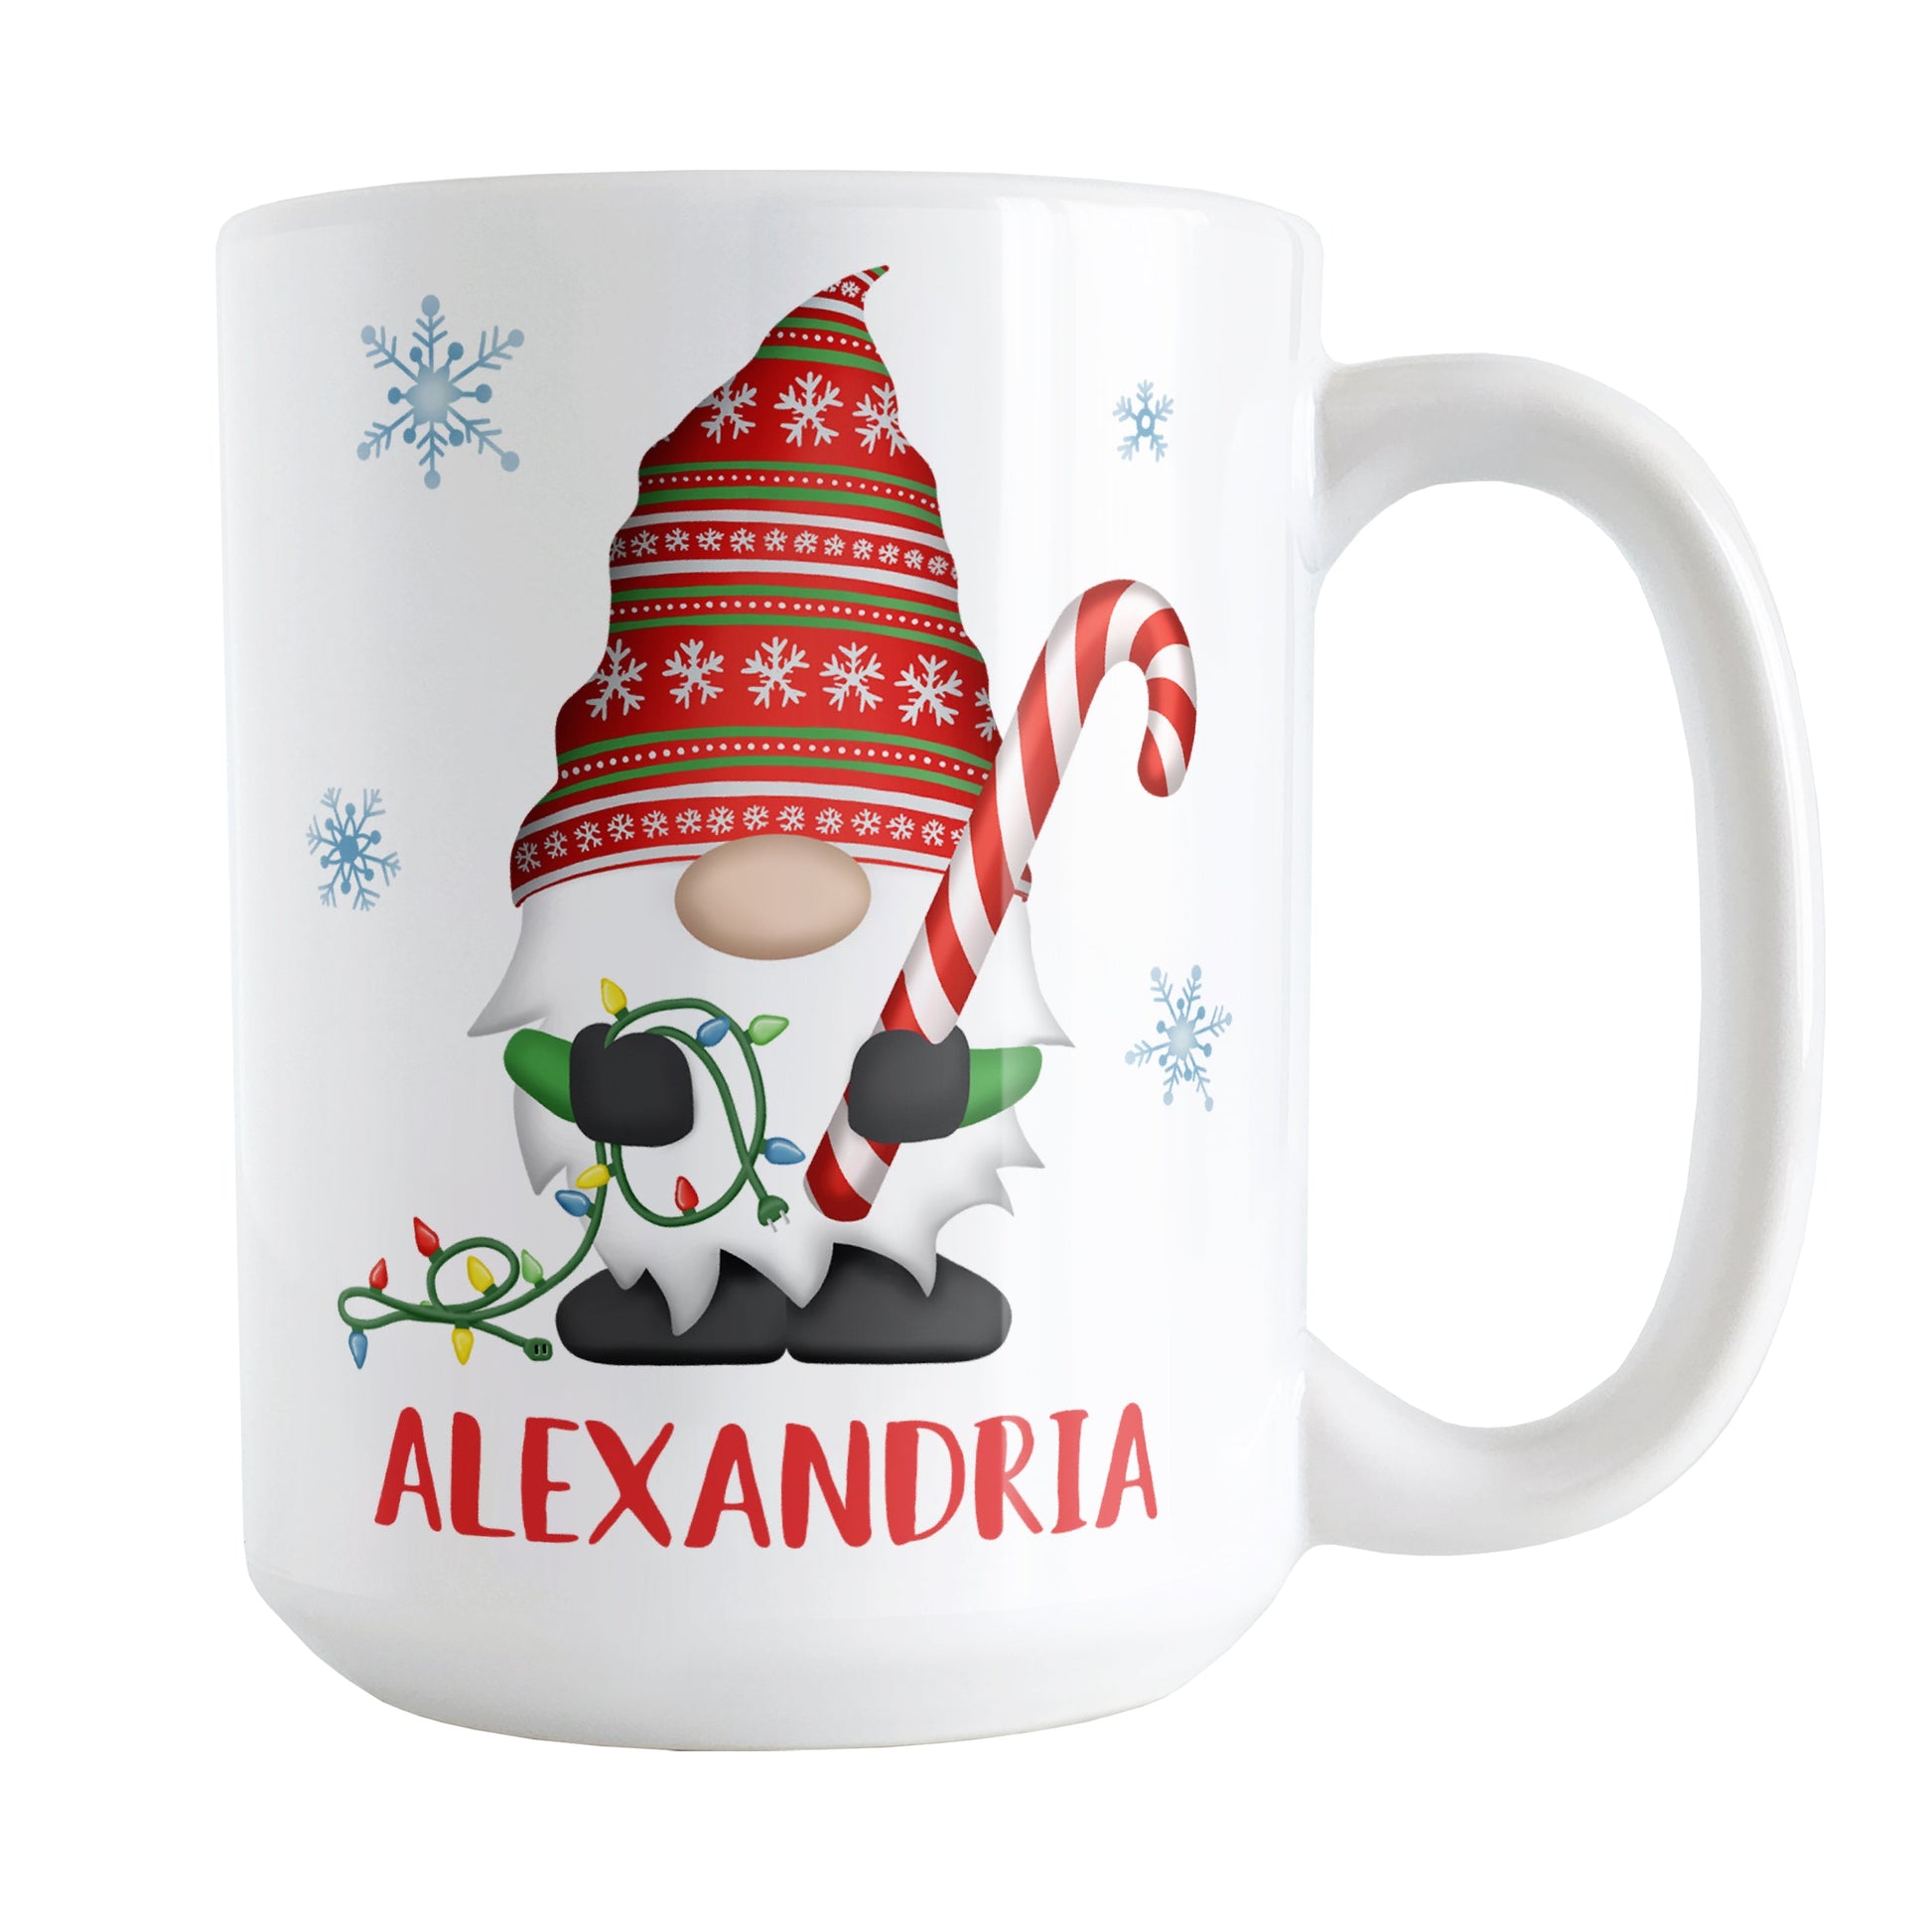 Personalized Holiday Candy Cane Gnome Mug (15oz) at Amy's Coffee Mugs. A ceramic coffee mug designed with a holiday gnome on both sides of the mug wearing a festive red and green snowflake hat and holding a large candy cane and a string of Christmas lights, with winter snowflakes around it. Your name is custom printed in red below the gnome.